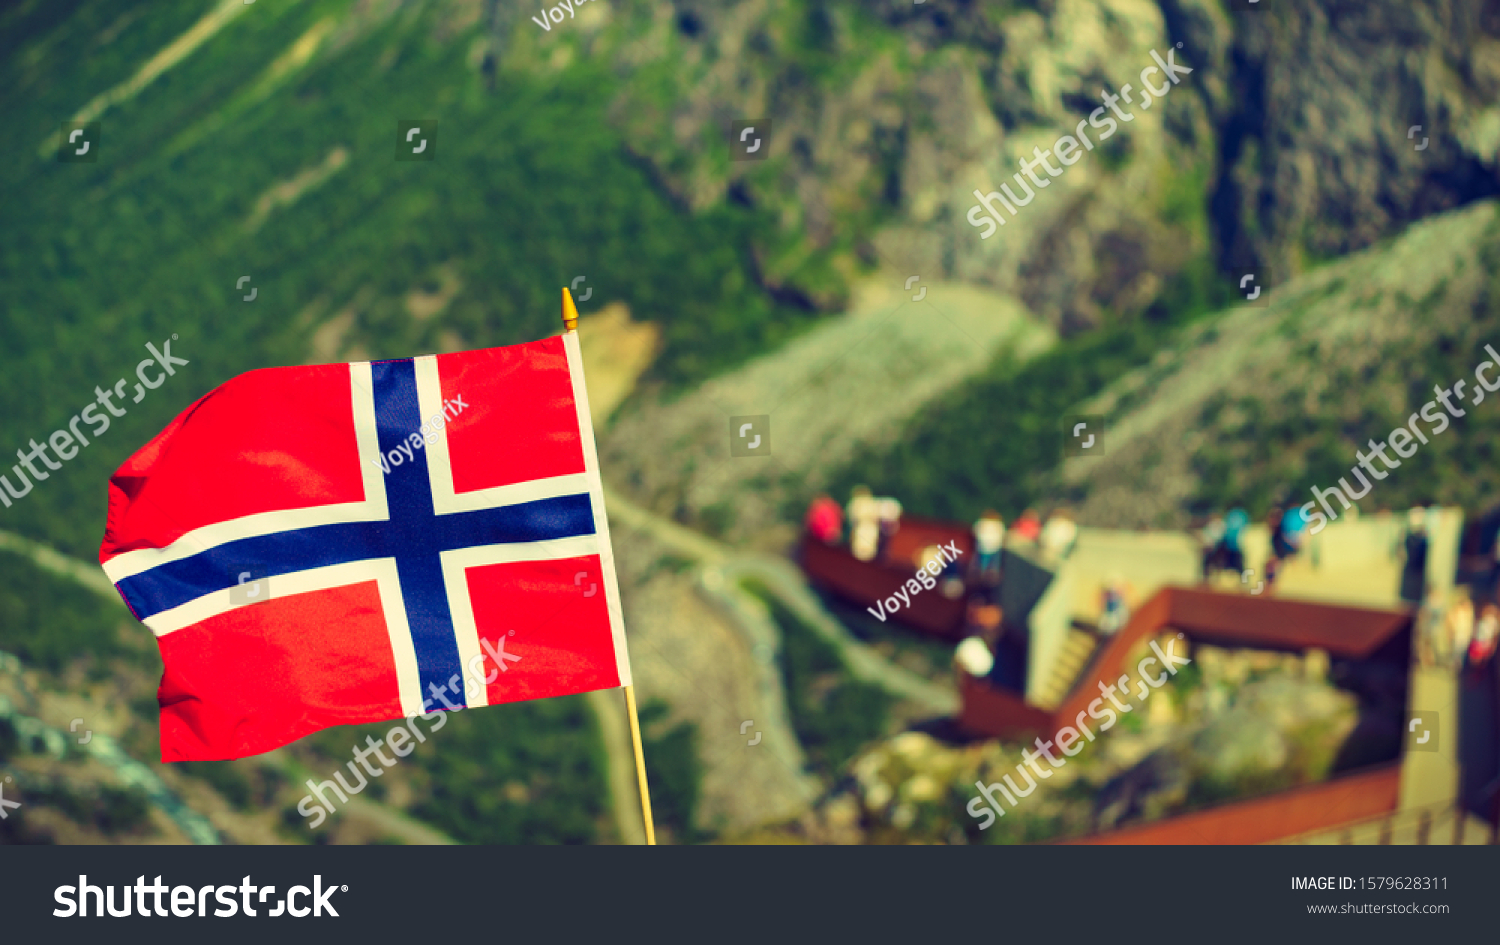 Trollstigen mountain road landscape in Norway, Europe. Norwegian flag waving and many tourists people on viewing platform in background. National tourist route. #1579628311